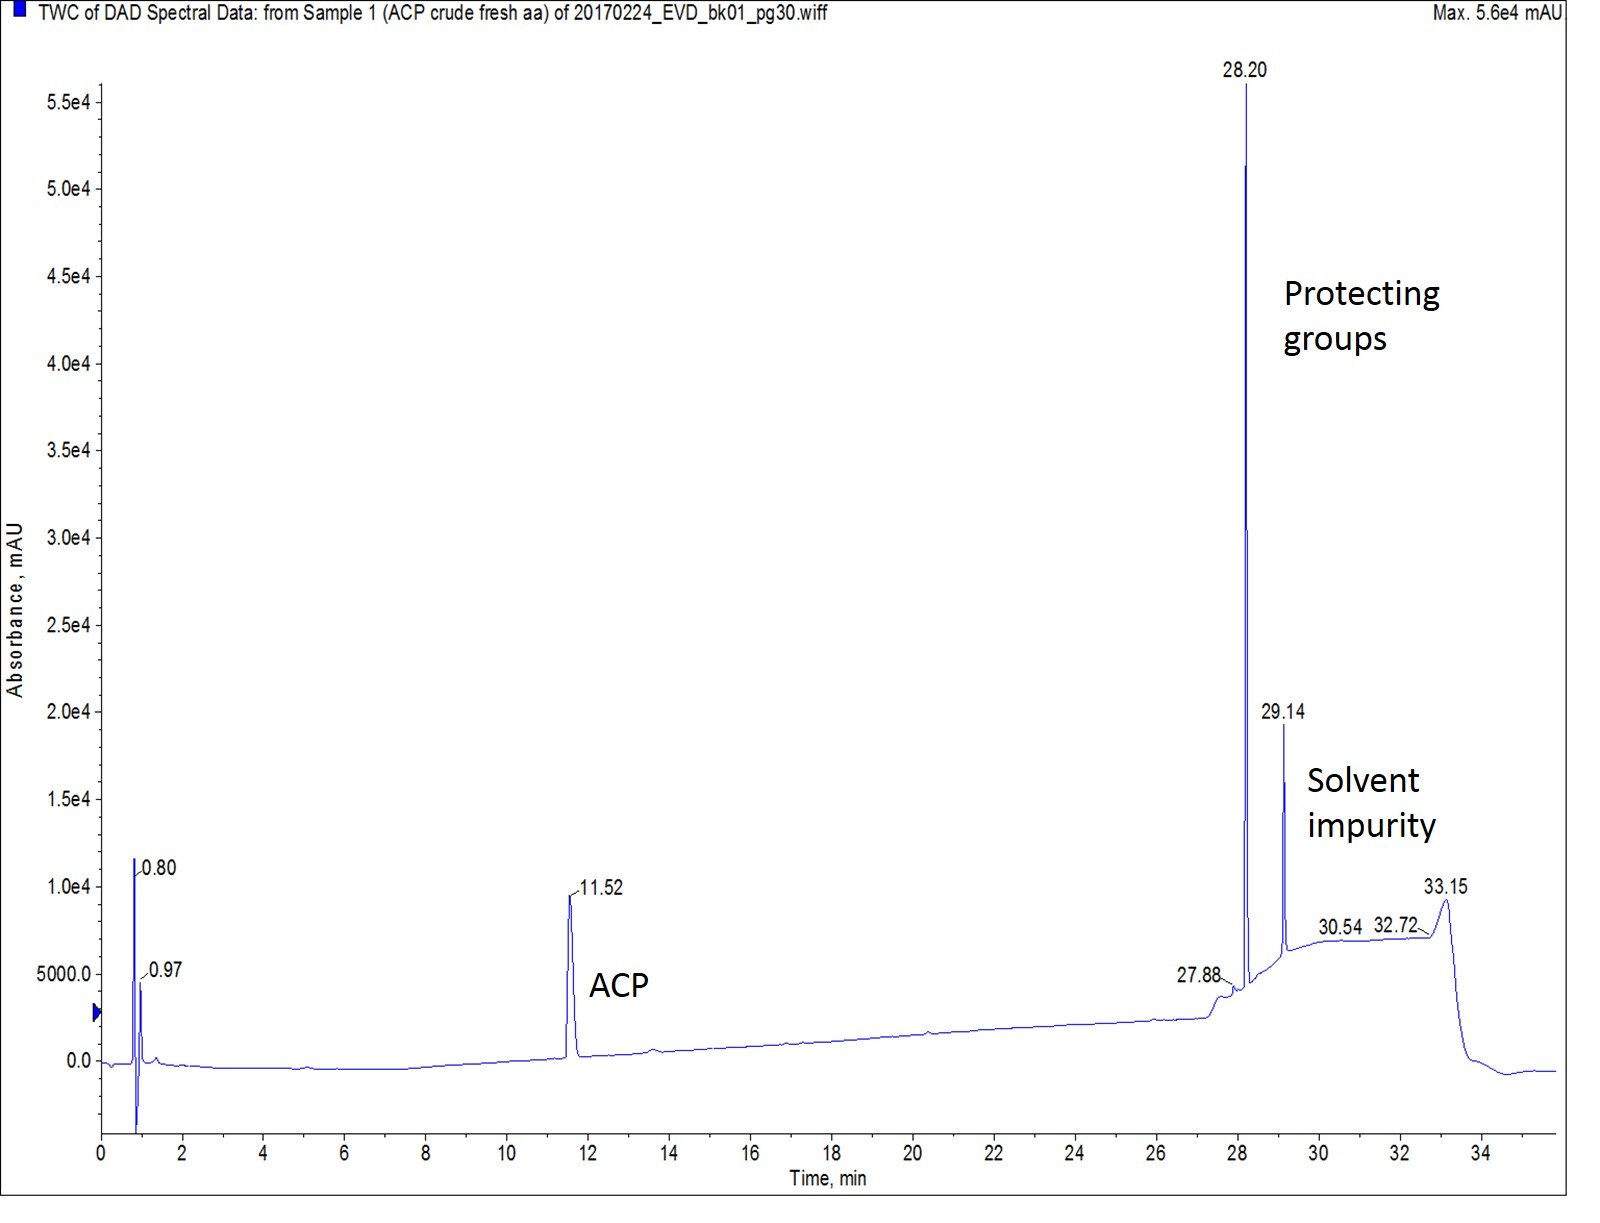 Figure 1: Crude analytical HPLC for ACP synthesized using freshly prepared amino acid solutions.